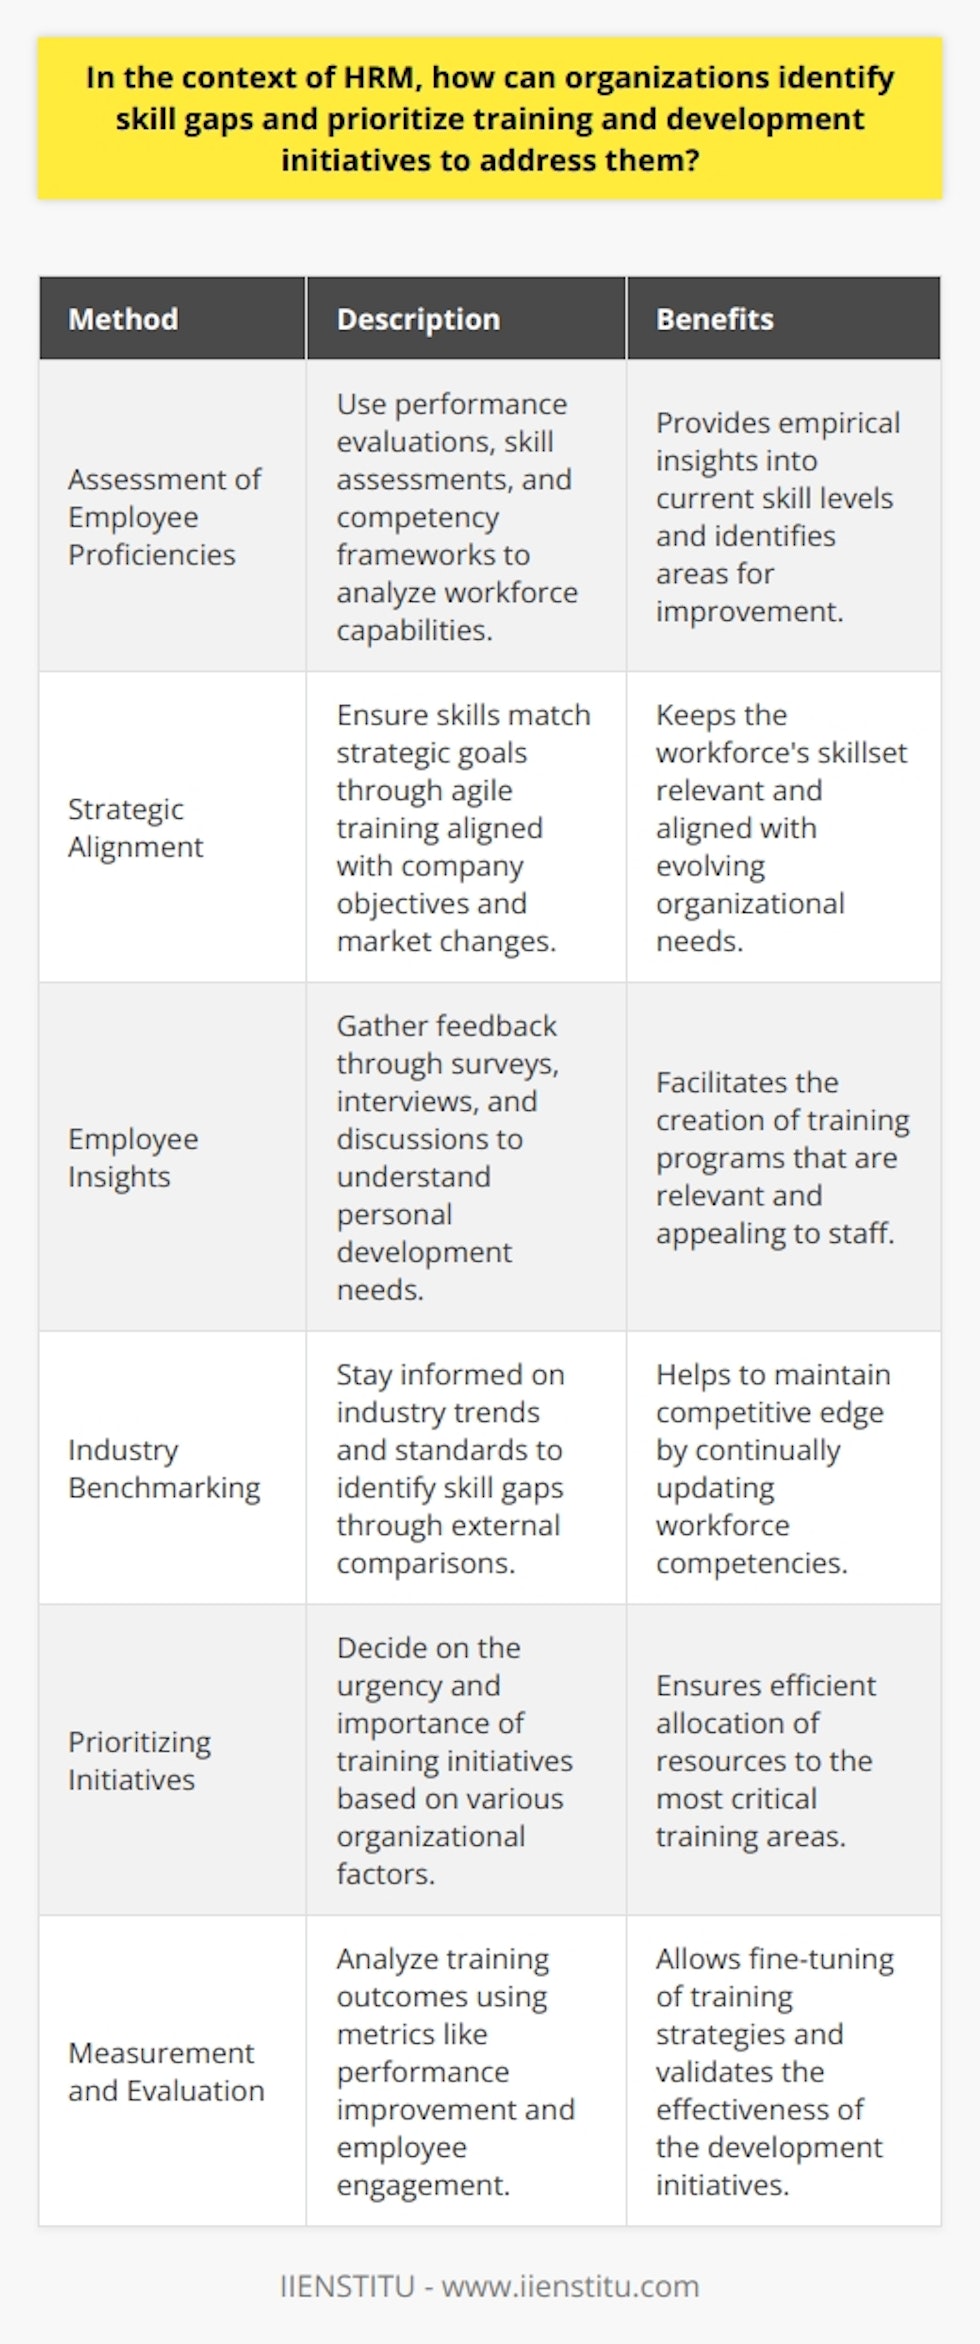 Identifying skill gaps within an organization is a critical component of effective Human Resource Management (HRM). Through a well-structured approach, organizations can align their workforce's capabilities with strategic objectives and enact training and development initiatives where they are most needed. Here's how they can approach this challenge:**Assessment of Employee Proficiencies**The first step involves a comprehensive analysis of employee proficiencies. This can be achieved through performance evaluations, skill assessments, and competency frameworks that reflect the organization's objectives. These tools provide HR professionals with empirical insights into where the workforce stands and what skills might need nurturing or updating.**Strategic Alignment**Understanding that an organization's needs evolve is crucial. As such, HRM must ensure that the skills of the workforce are in alignment with the ever-shifting strategic goals of the company. This necessitates an agile approach to training and development, where the focus areas can be swiftly adjusted in response to new objectives or market demands.**Employee Insights**Employees are a valuable source of insight regarding their own developmental needs. Collecting feedback through surveys, one-on-one interviews, performance discussions, and informal conversations can uncover personal ambitions and perceived barriers to success. HR can tap into these data points to design more targeted and appealing training programs.**Industry Benchmarking**Awareness of industry trends and benchmarking against market standards can highlight hidden skill gaps. By participating in industry forums, networking events, professional associations, and subscribing to relevant publications, HR professionals can maintain an up-to-date knowledge base and apply these insights to their internal training approaches.**Prioritizing Initiatives**Determining the urgency and importance of training initiatives is a key decision-making process in HRM. Factors including the impact on the company's competitive position, the costs involved, the potential for employee growth, and even legislative requirements guiding certain skill proficiencies all play into how HR prioritizes its training agenda.**Measurement and Evaluation**Lastly, the evaluation of training outcomes is an indispensable part of this process. It allows HR to determine if the initiatives have successfully bridged the skill gaps and contributed to the organization's aims. Metrics such as performance improvement, employee engagement, and retention rates serve as indicators of the effectiveness of the training and development strategies.By adopting these methods, organizations place themselves in a strong position to define and address their skill gaps proactively. This not only enhances individual employee performance but also ensures that the organization remains competitive and capable of achieving its strategic goals. The true measure of success in this endeavor is a nimble workforce that continually refines its skills to meet both current and future challenges.